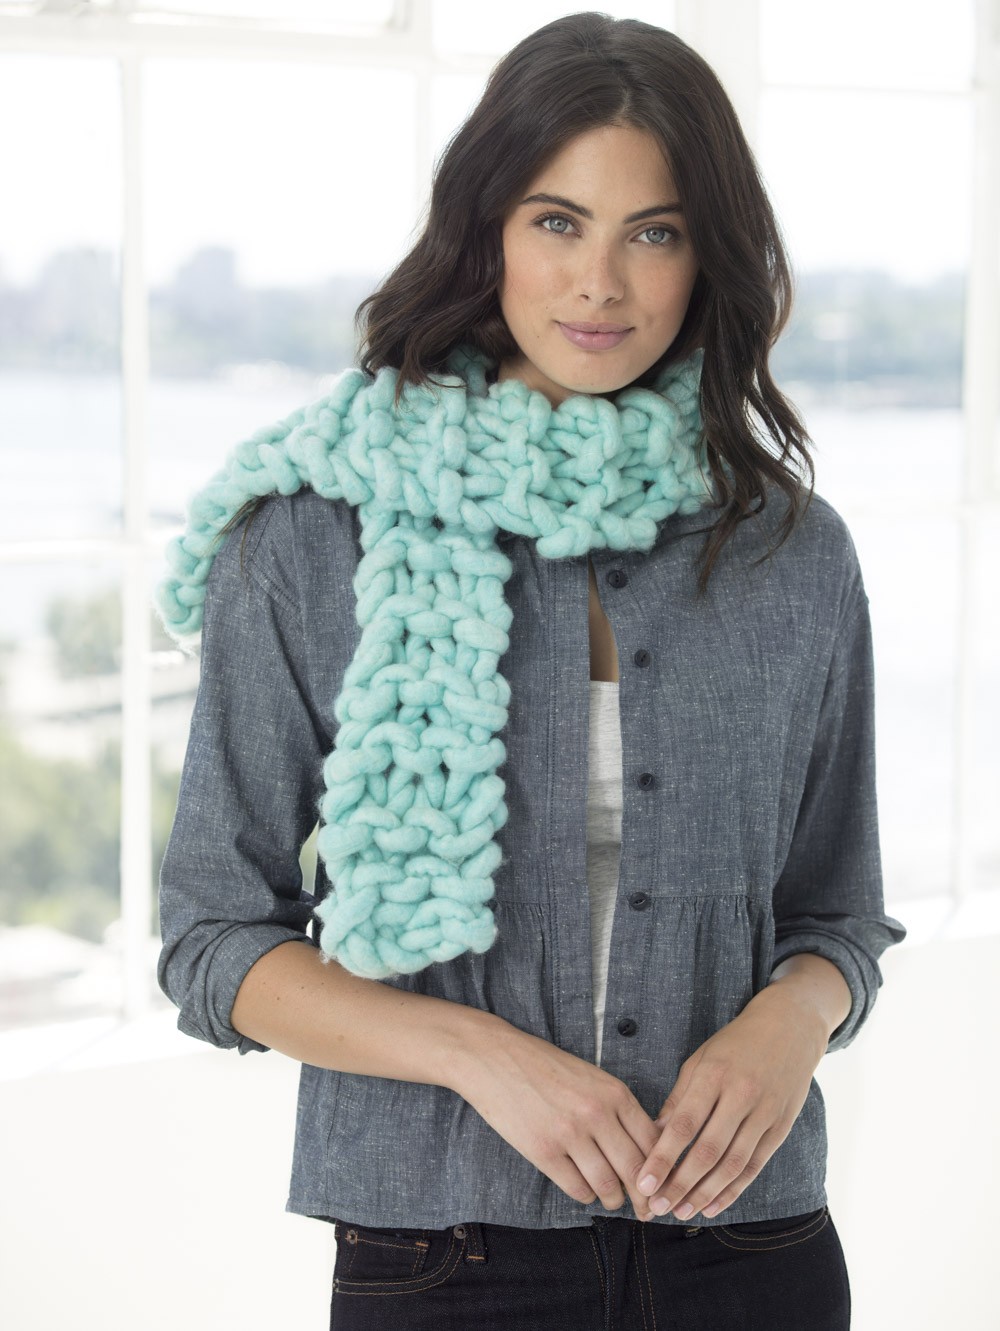 Neck's Best Thing Knit Scarf